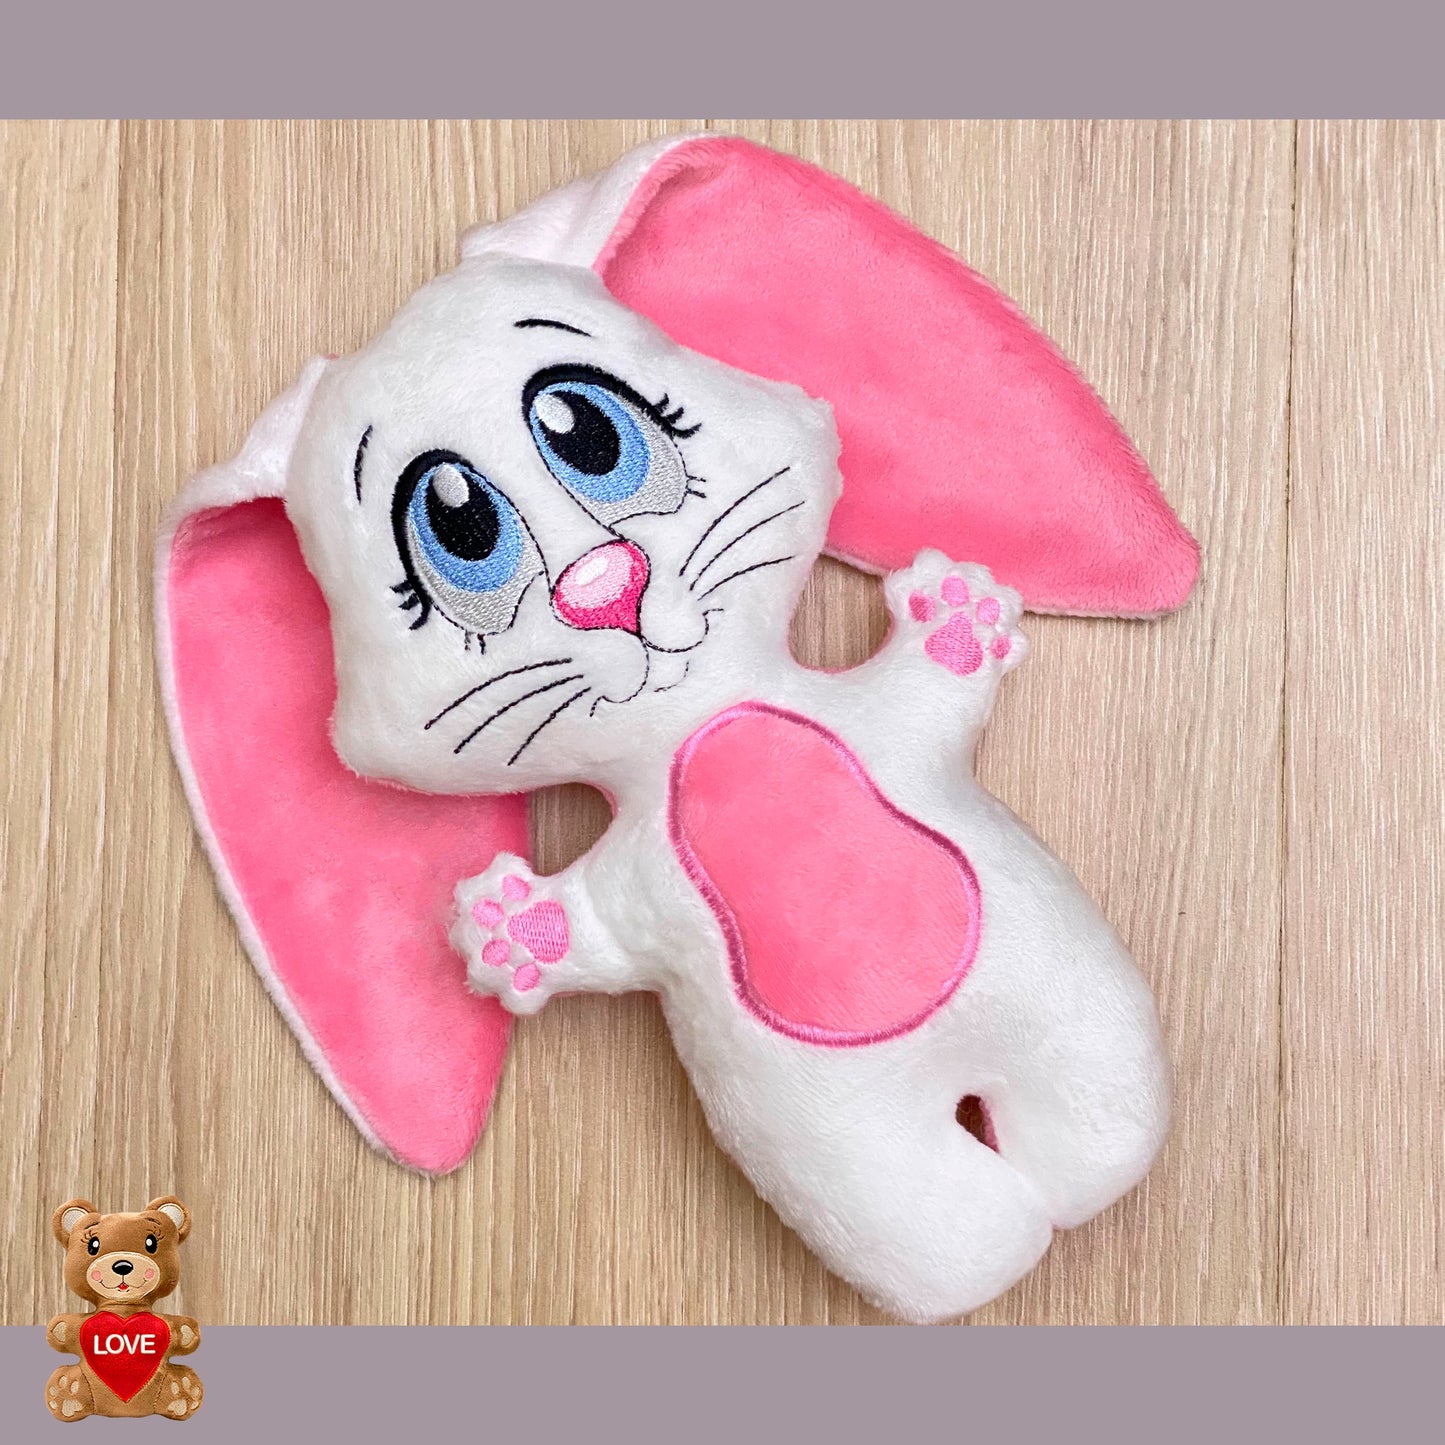 Personalised embroidery Plush Soft Toy Bunny Rabbit ,Super cute personalised soft plush toy, Personalised Gift, Unique Personalized Birthday Gifts , Custom Gifts For Children